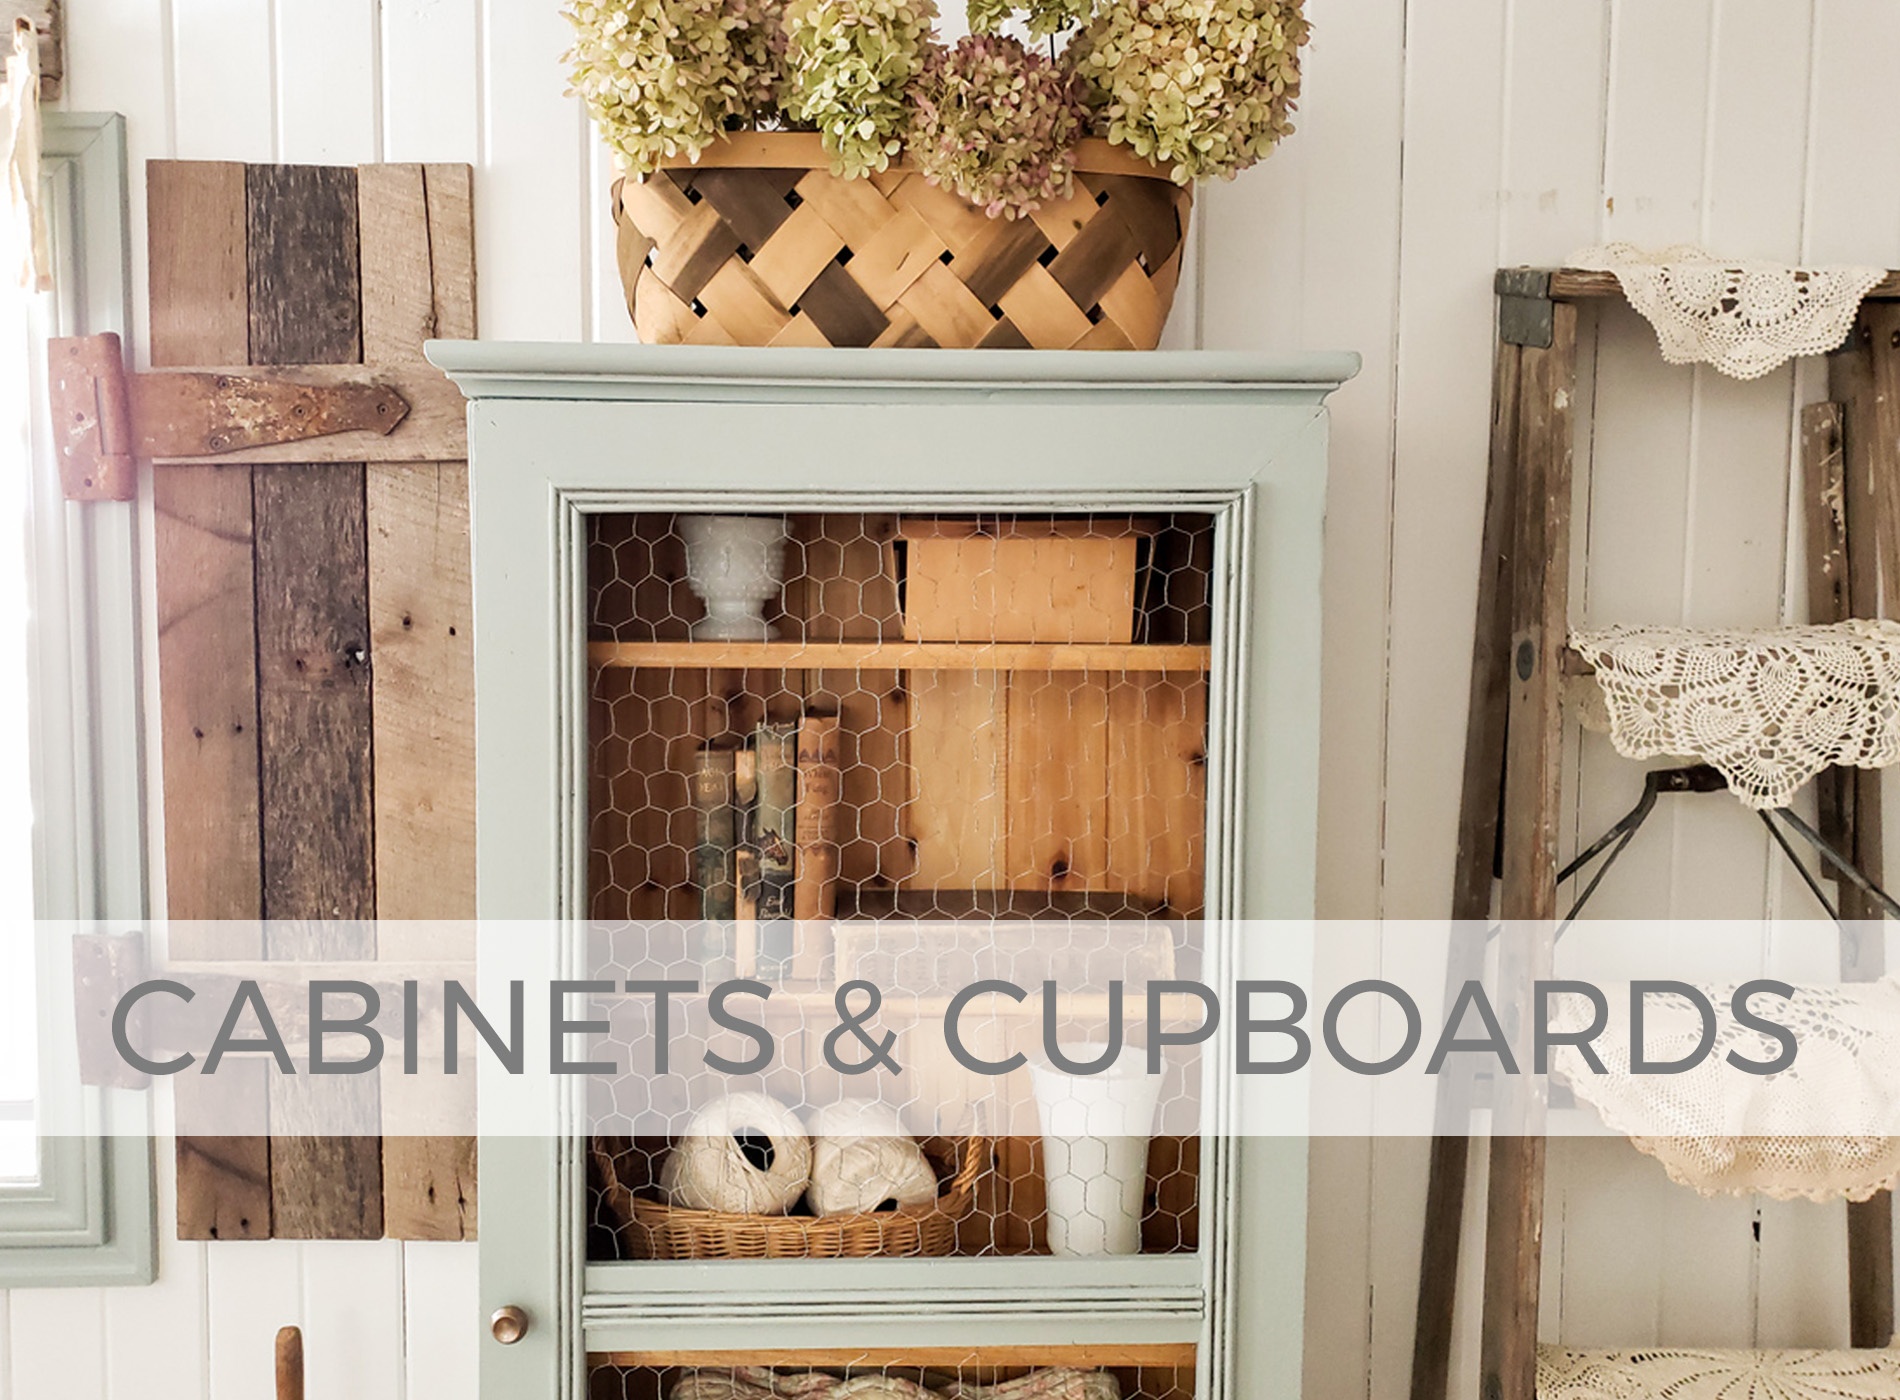 Cabinets and Cupboards by Larissa of Prodigal Pieces | prodigalpieces.com